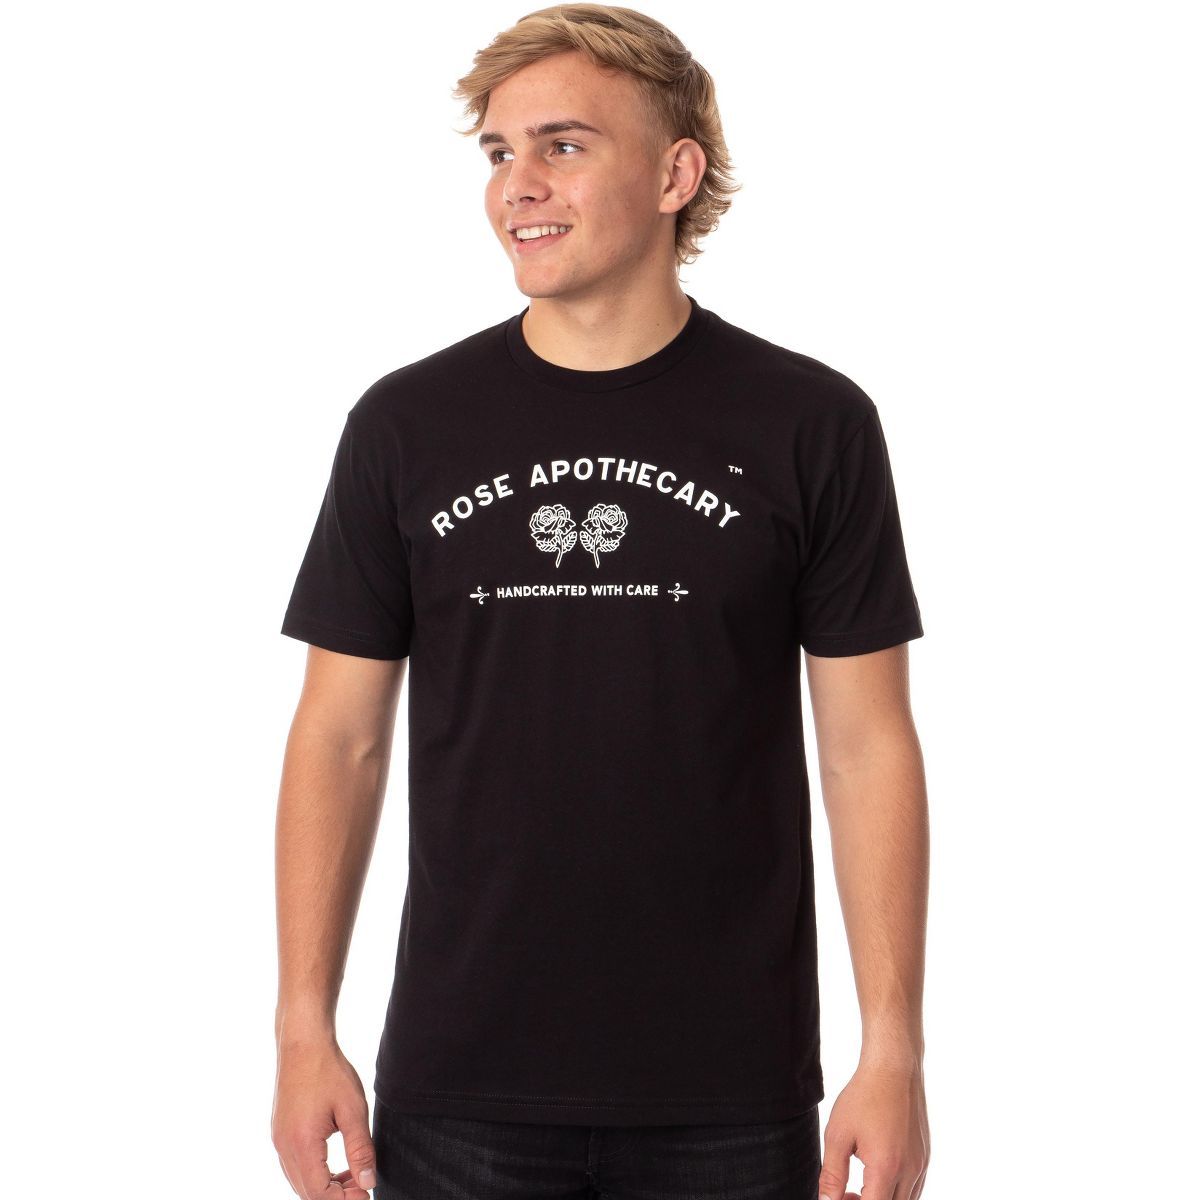 Schitt's Creek Mens' Rose Apothecary Handcrafted With Care T-Shirt | Target